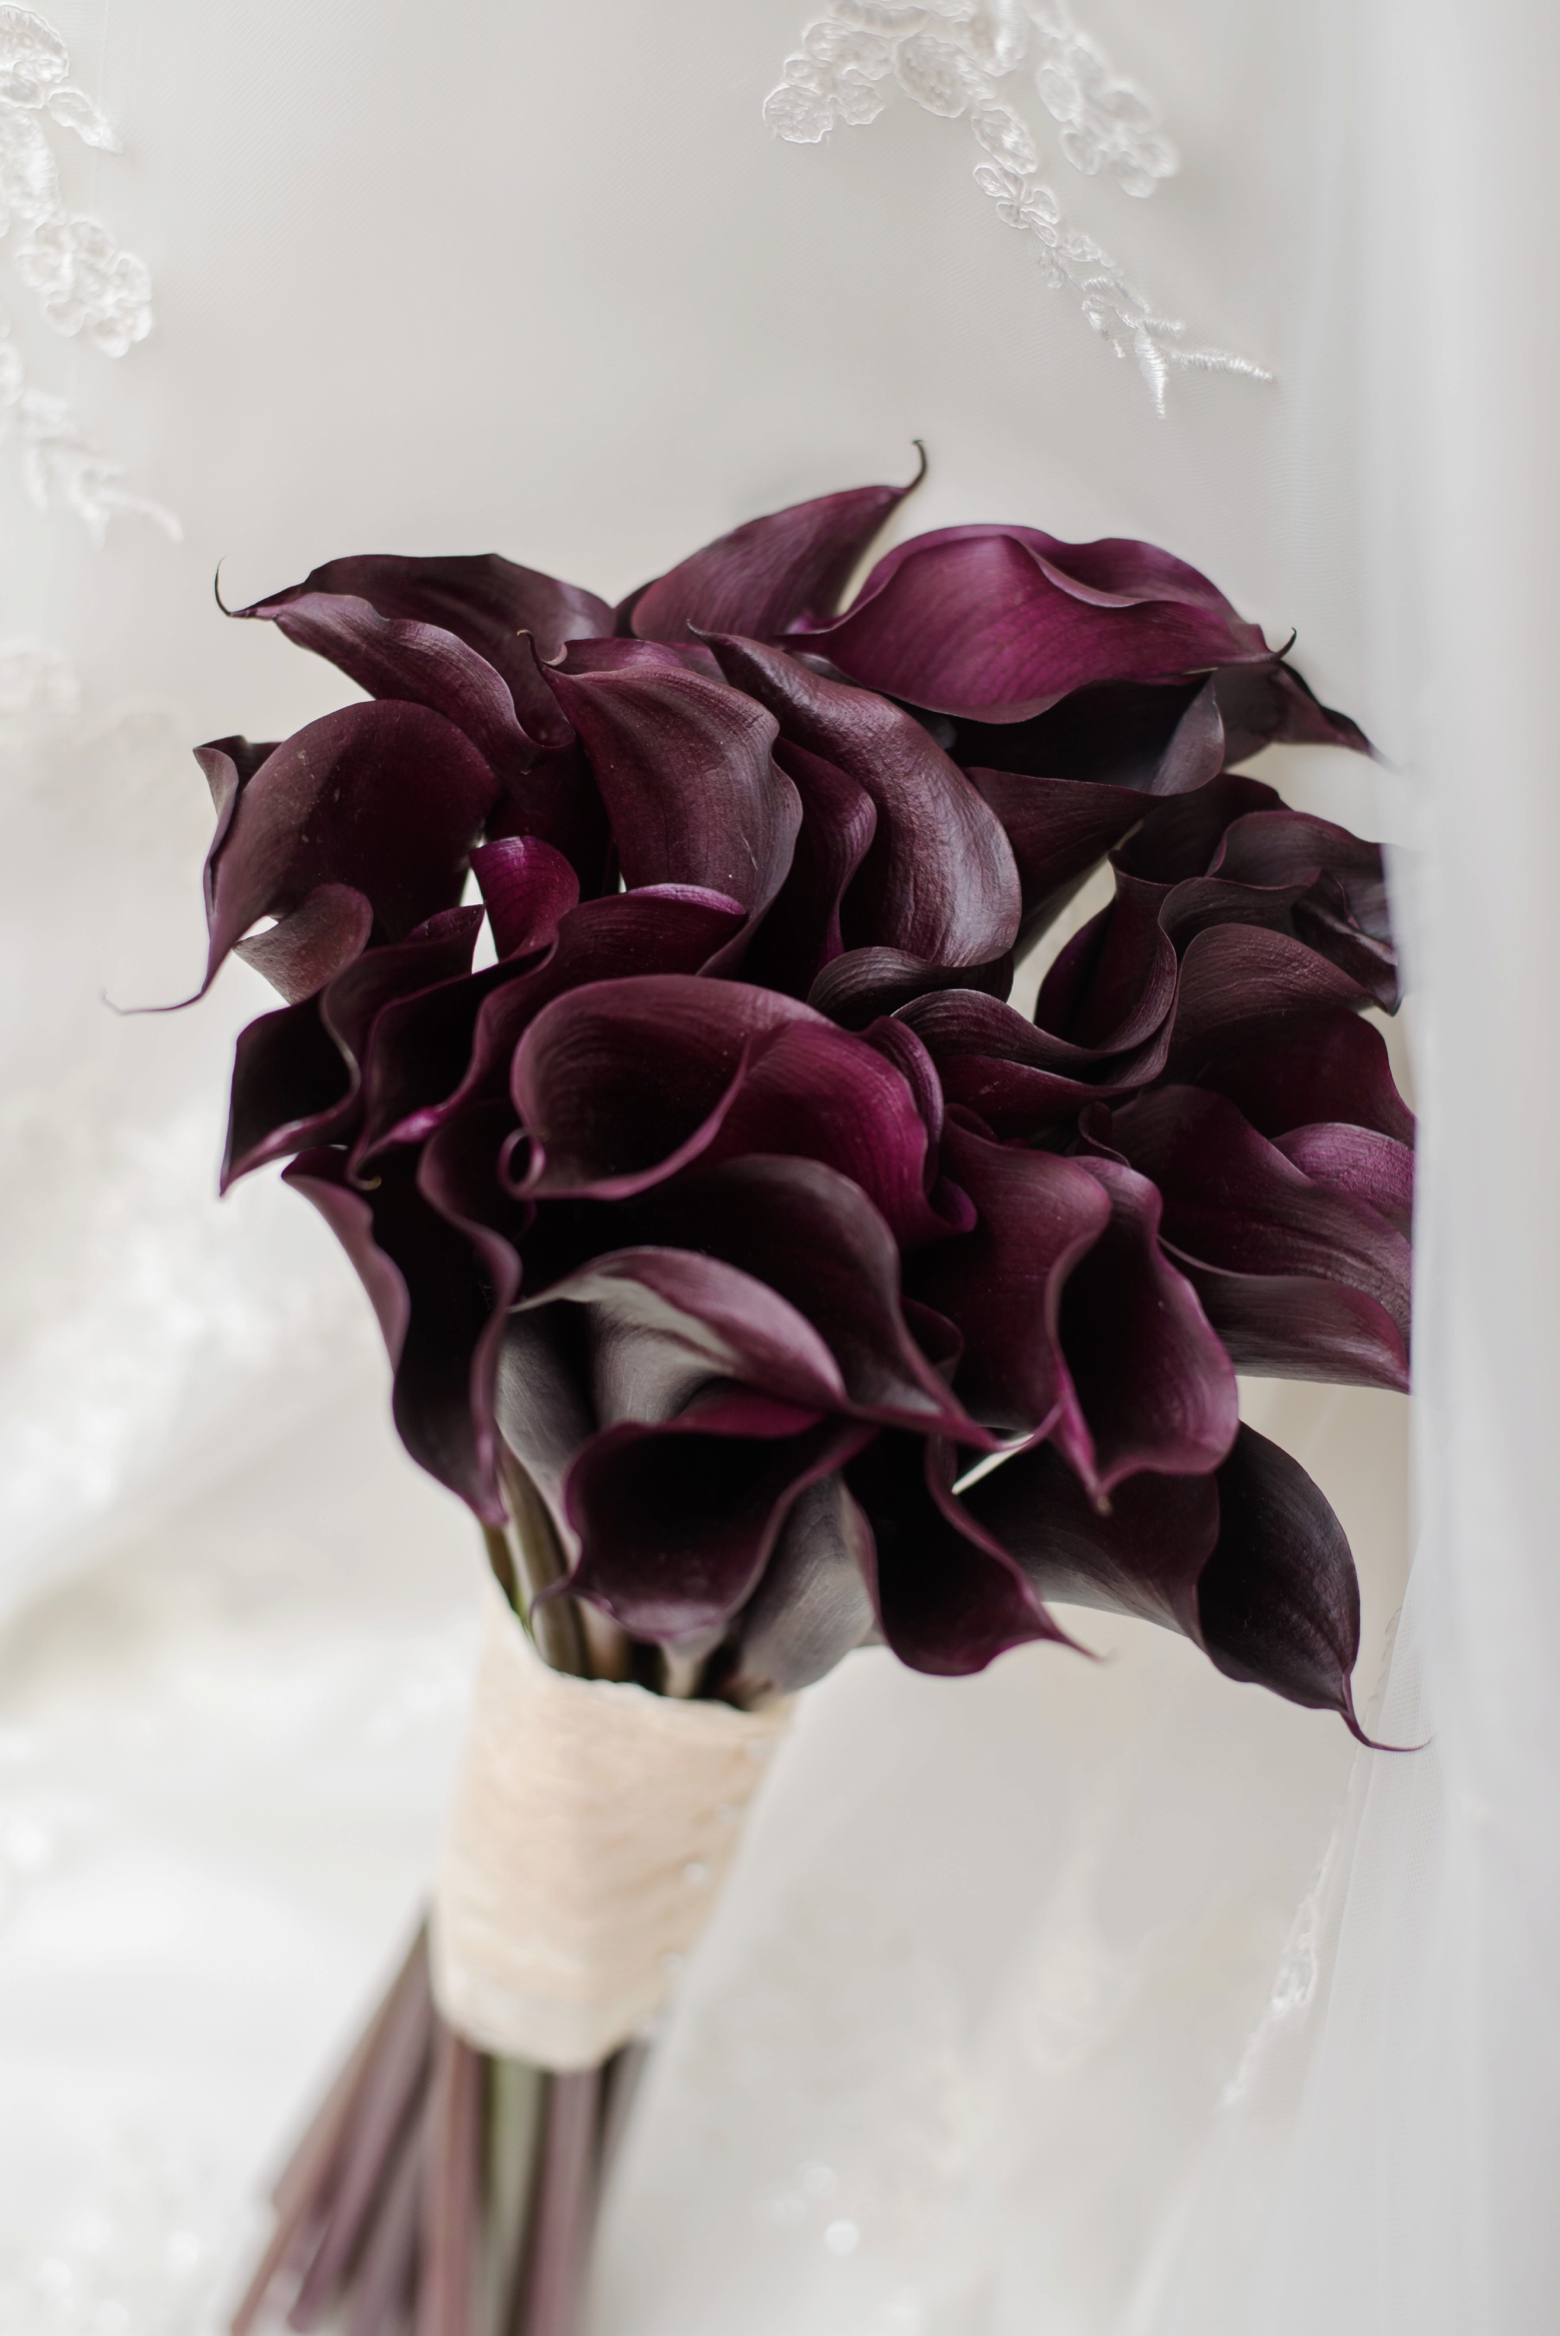 A unique floral bouquet of dark purple flowers wrapped in ribbon